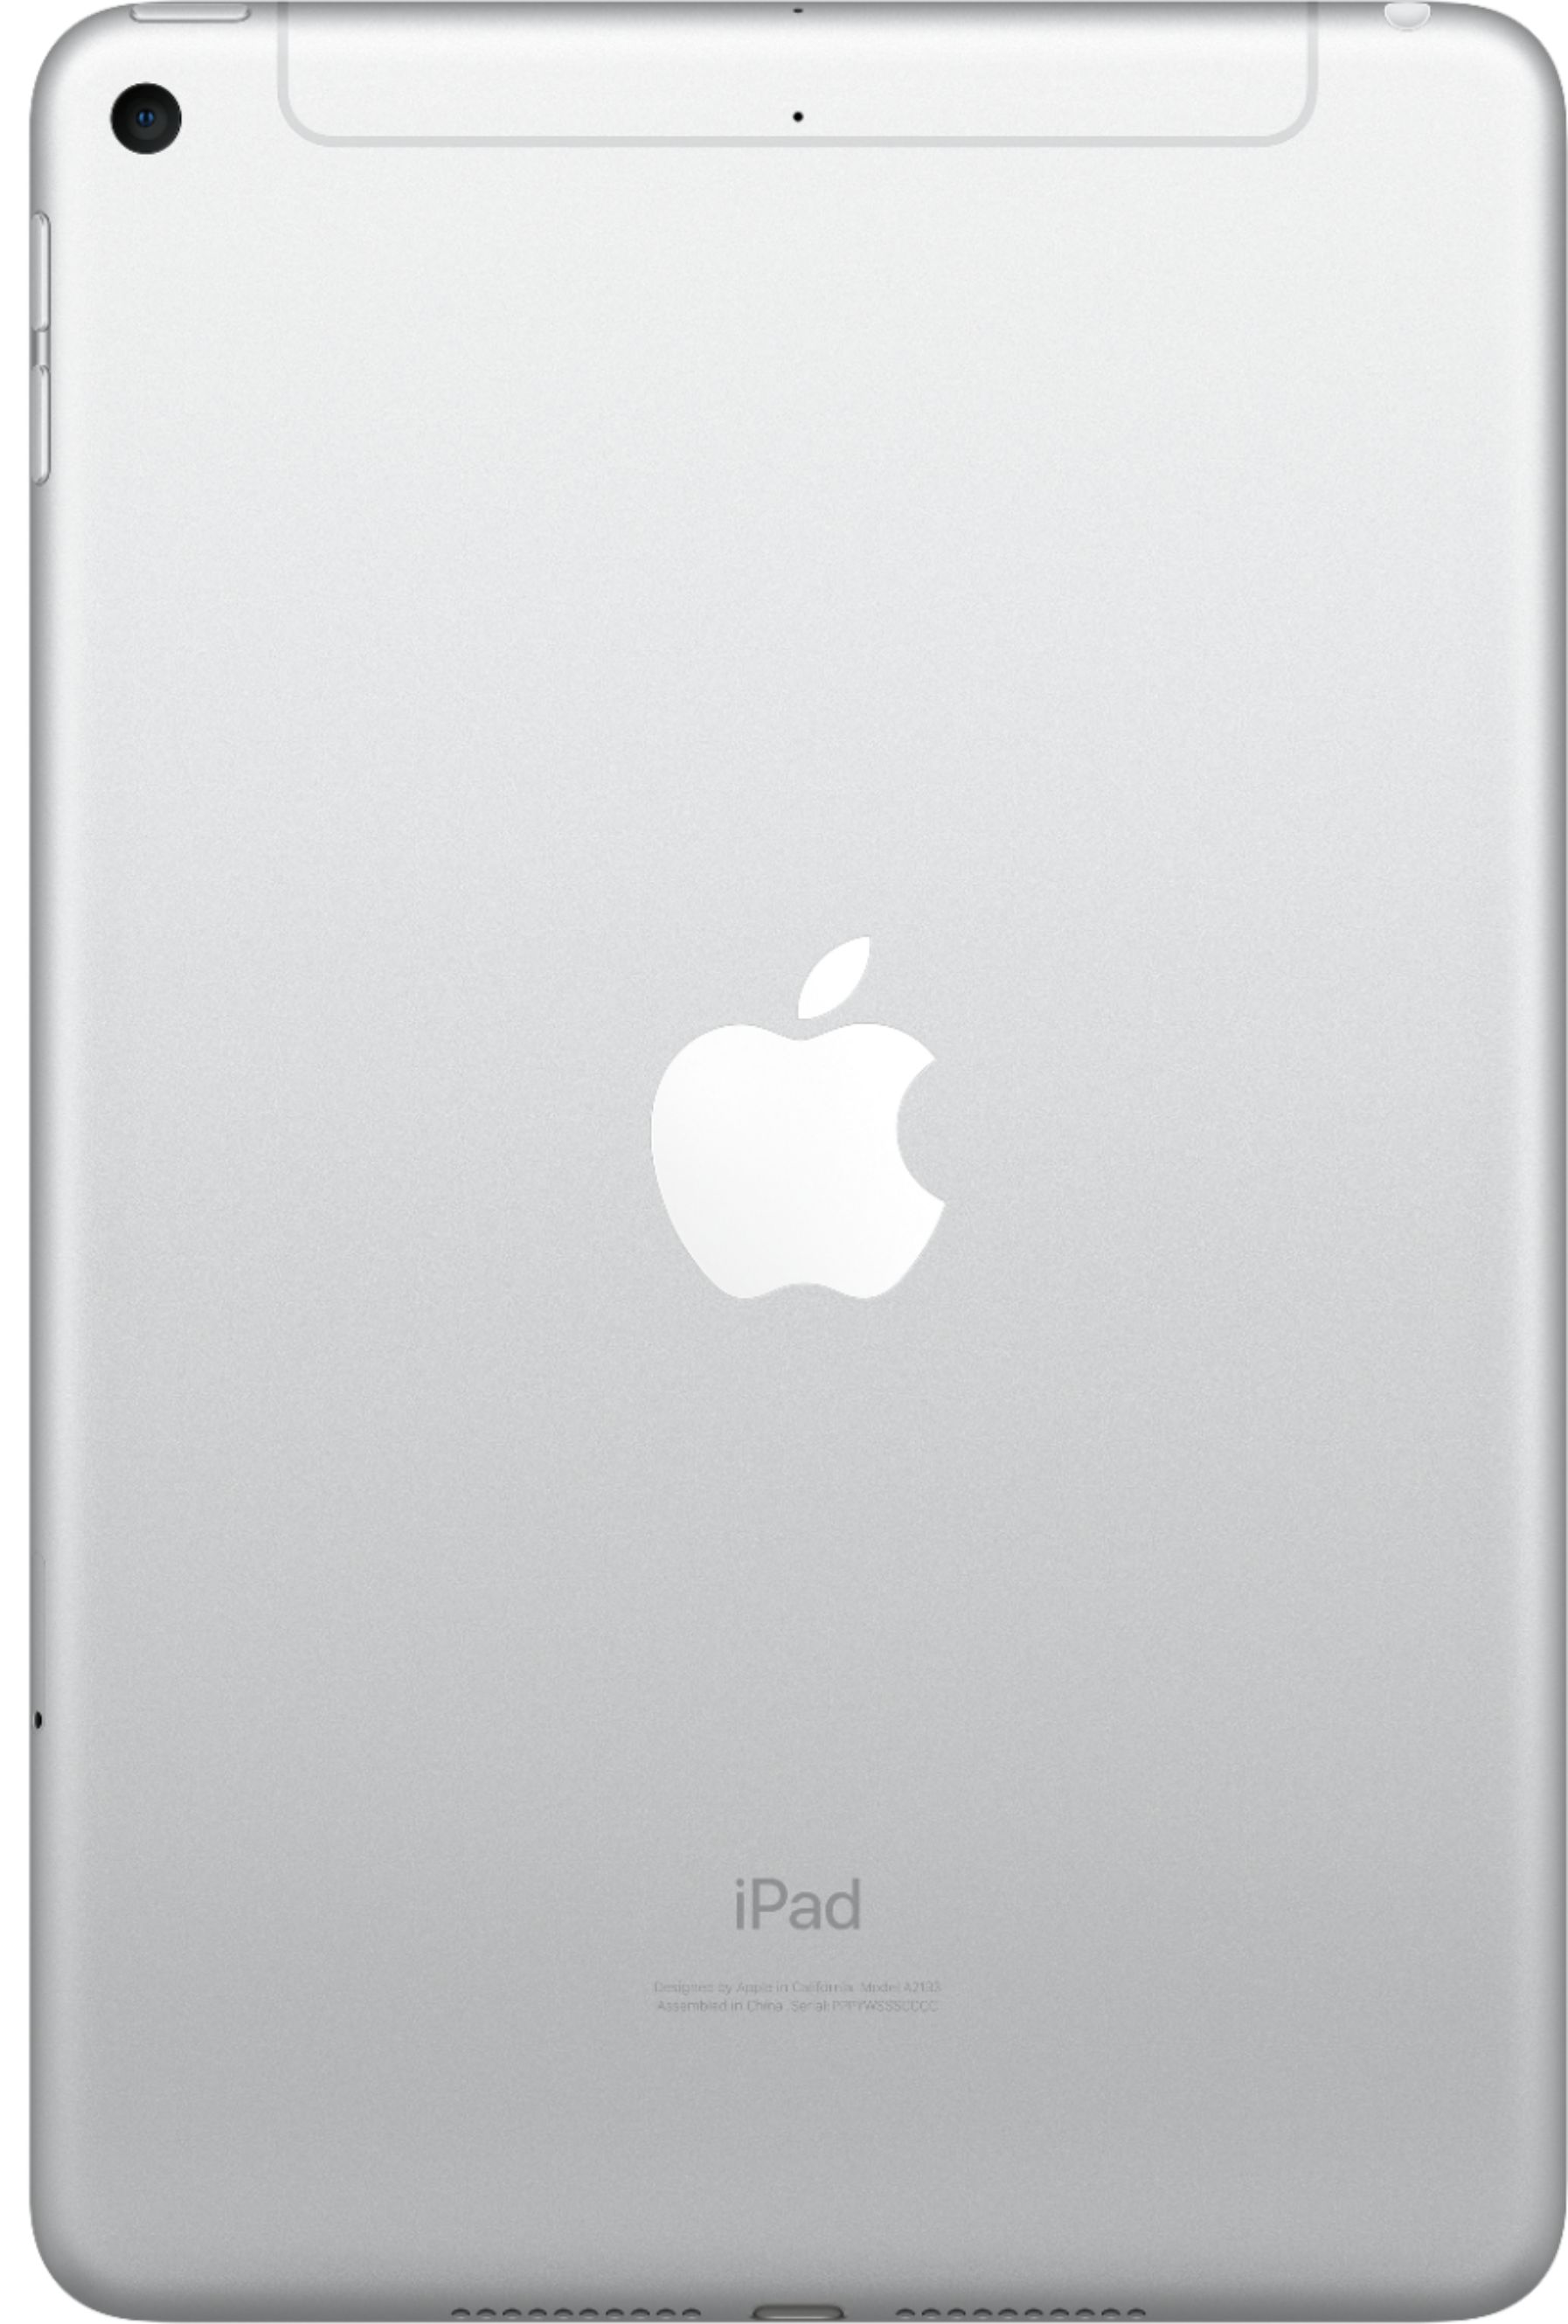 Back View: Apple - 10.2-Inch iPad with Wi-Fi + Cellular - 64GB - Space Gray (Verizon)